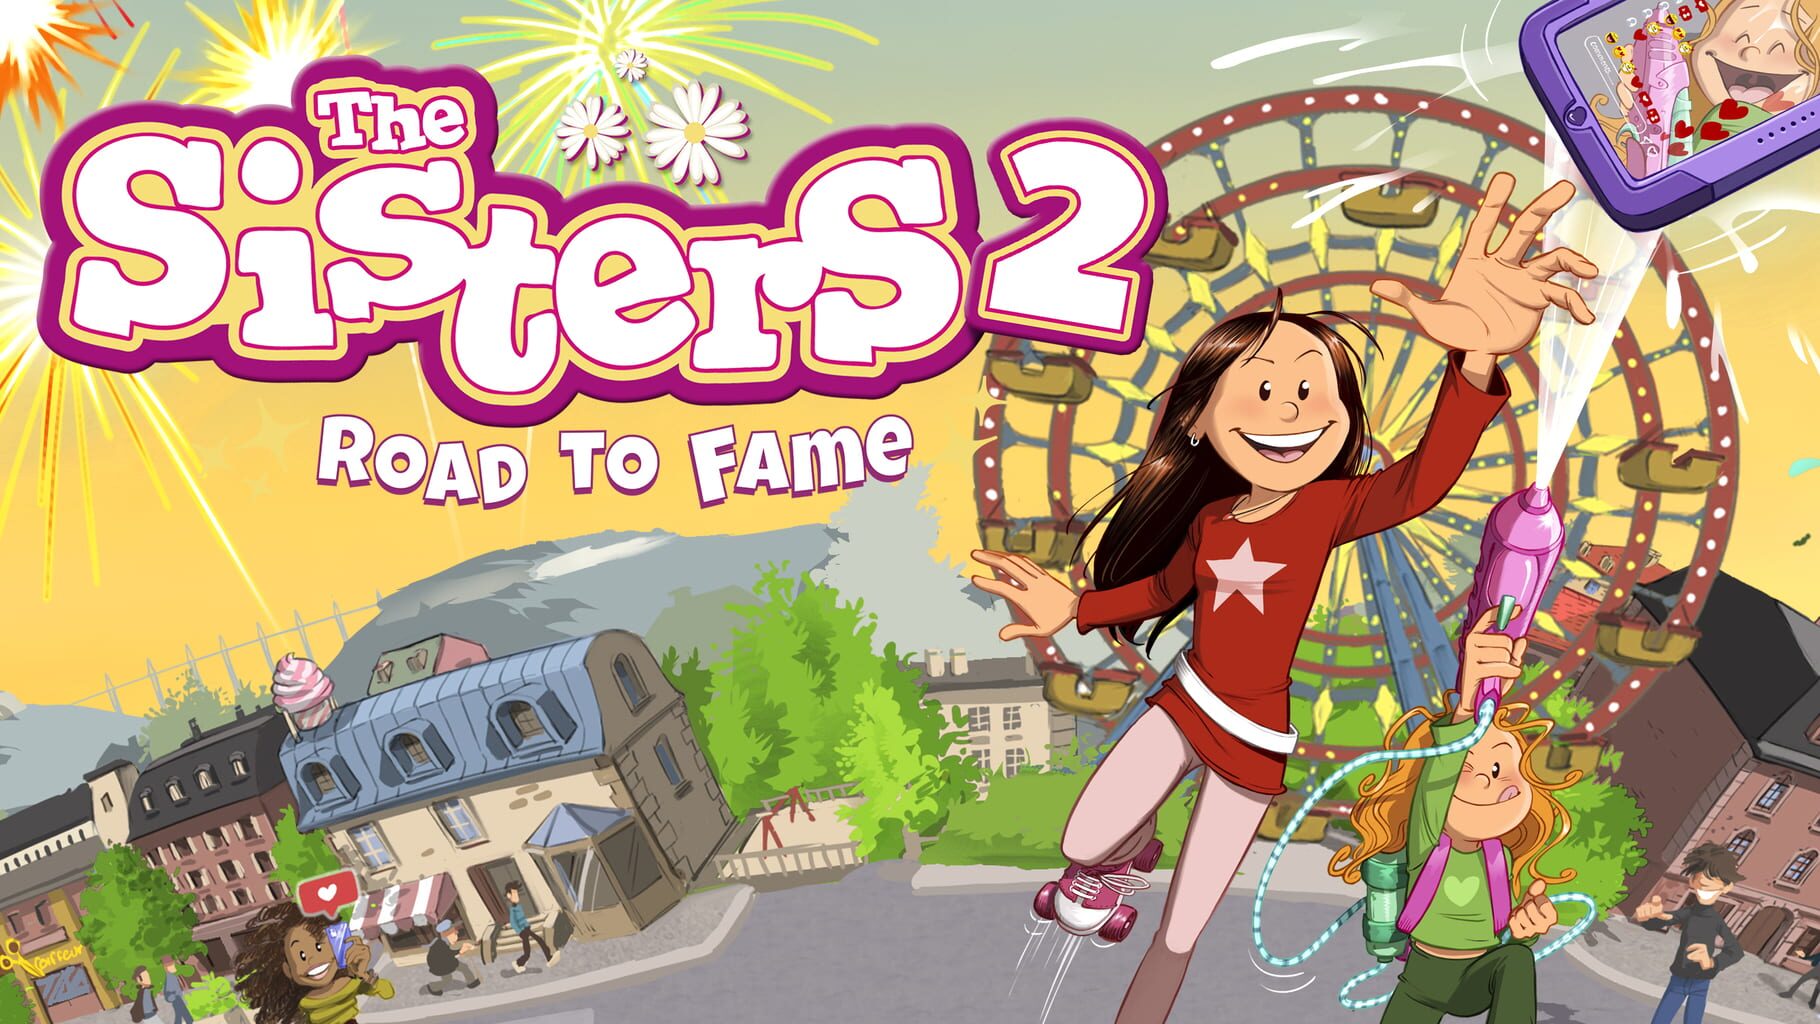 Arte - The Sisters 2: Road to Fame